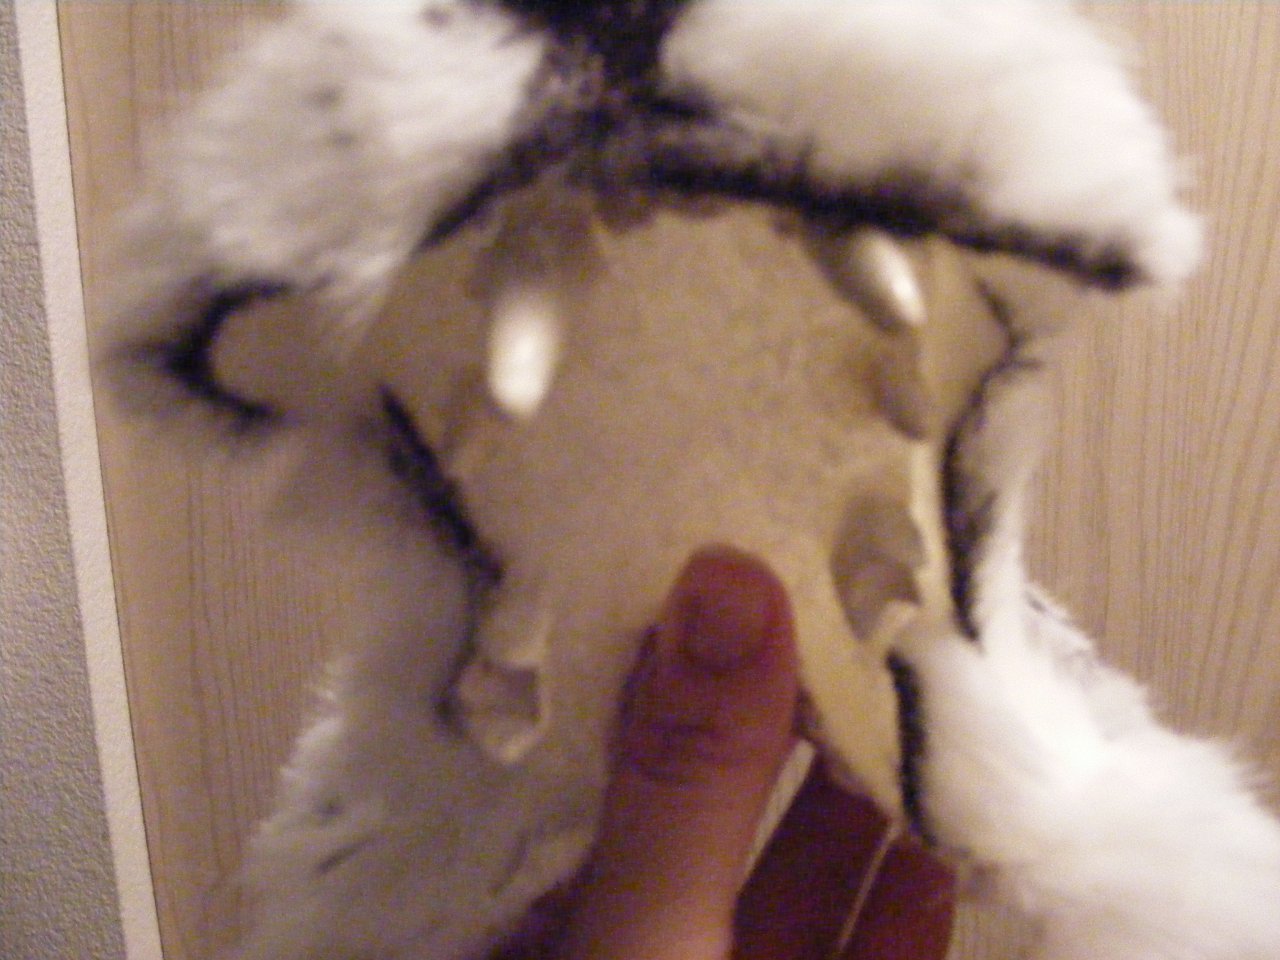 Therian wolf mask